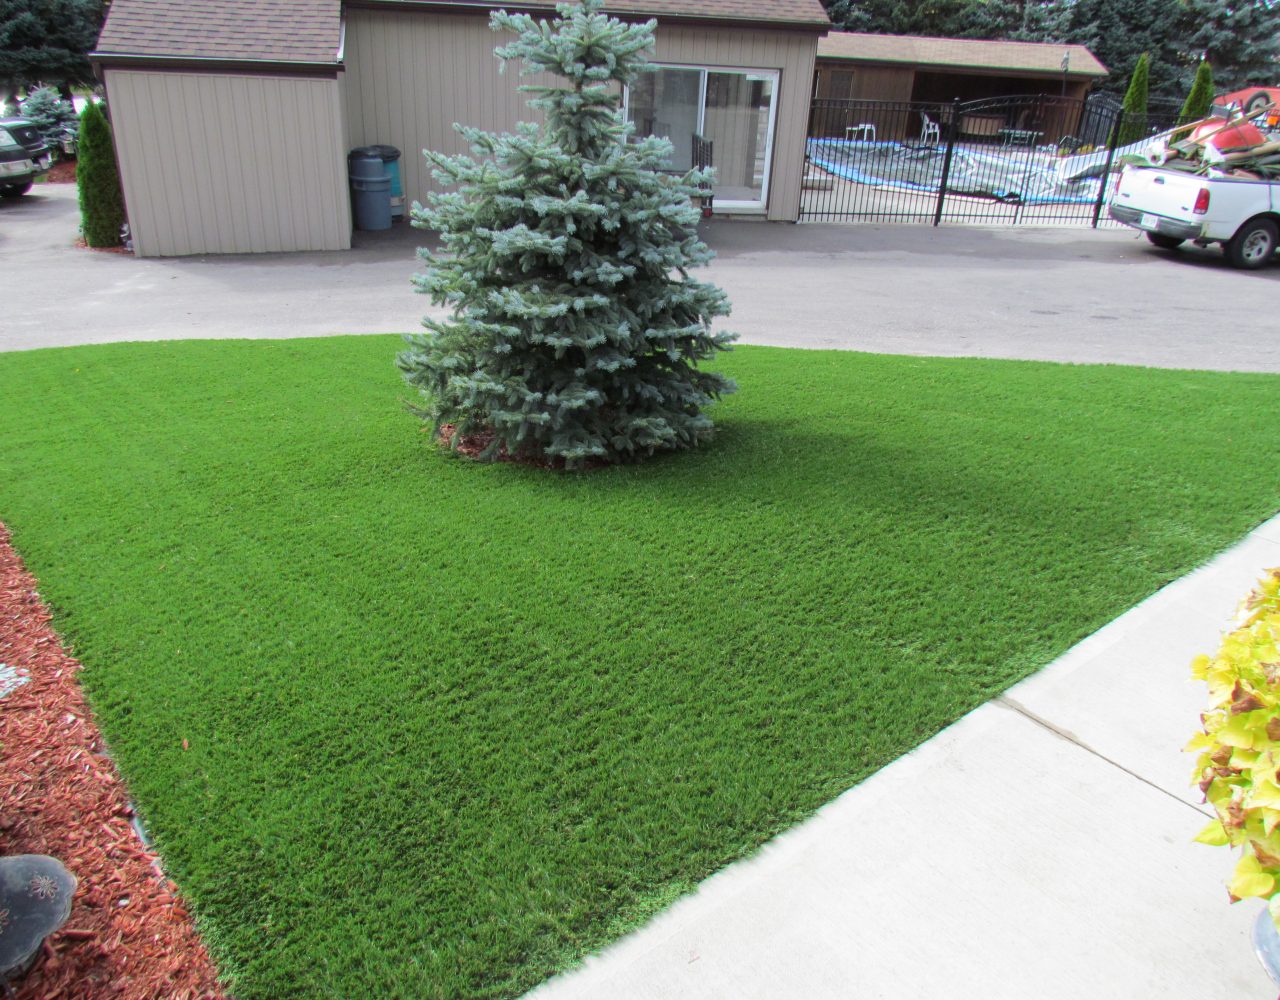 Synthetic lawns pay for themselves after 5-7 years